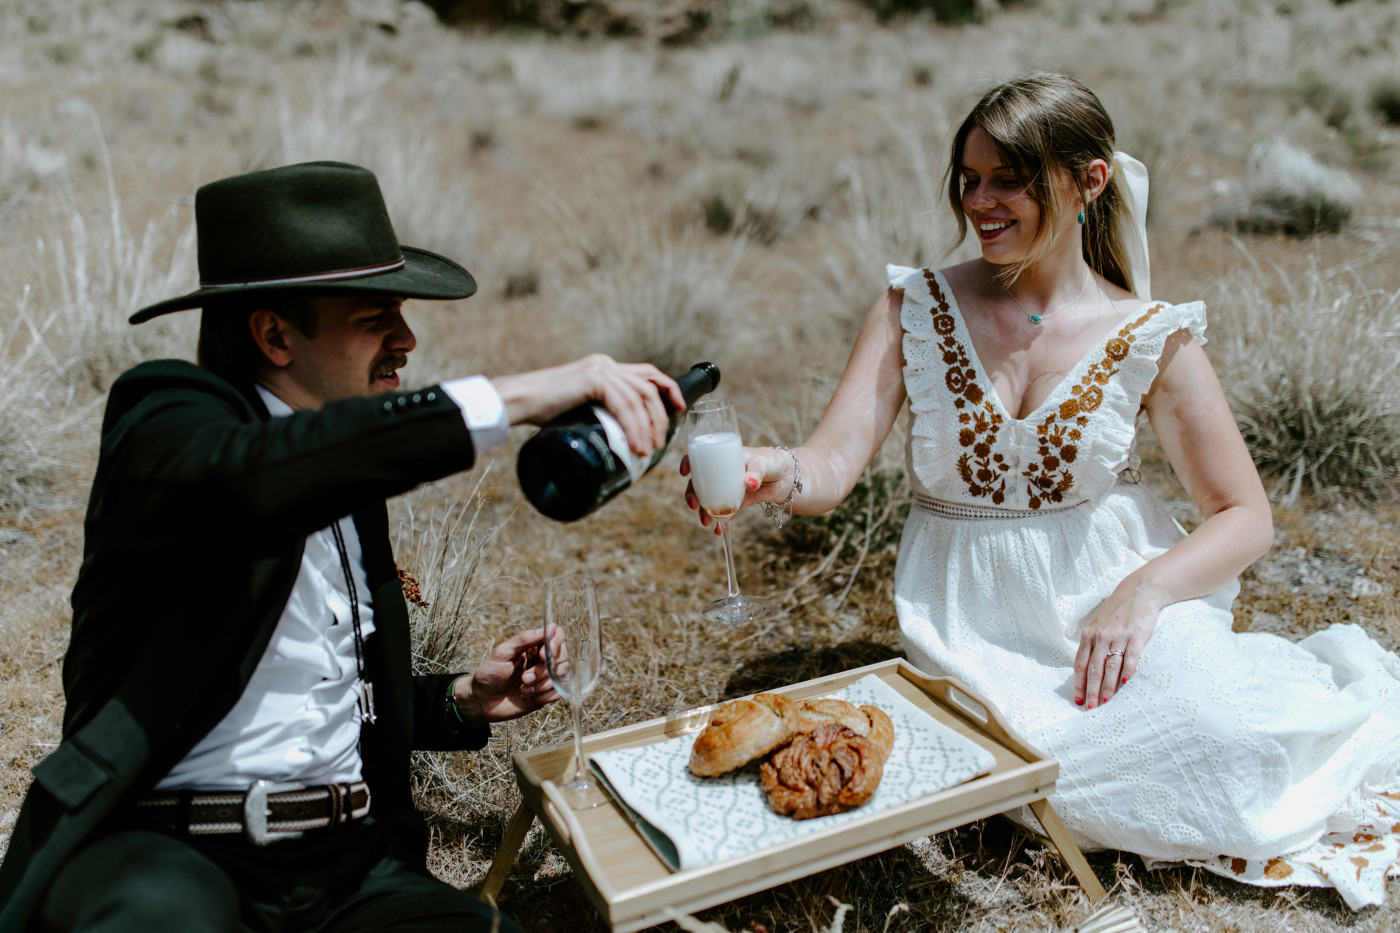 Emily and Greyson pour champagne. Elopement photography in the Central Oregon desert by Sienna Plus Josh.